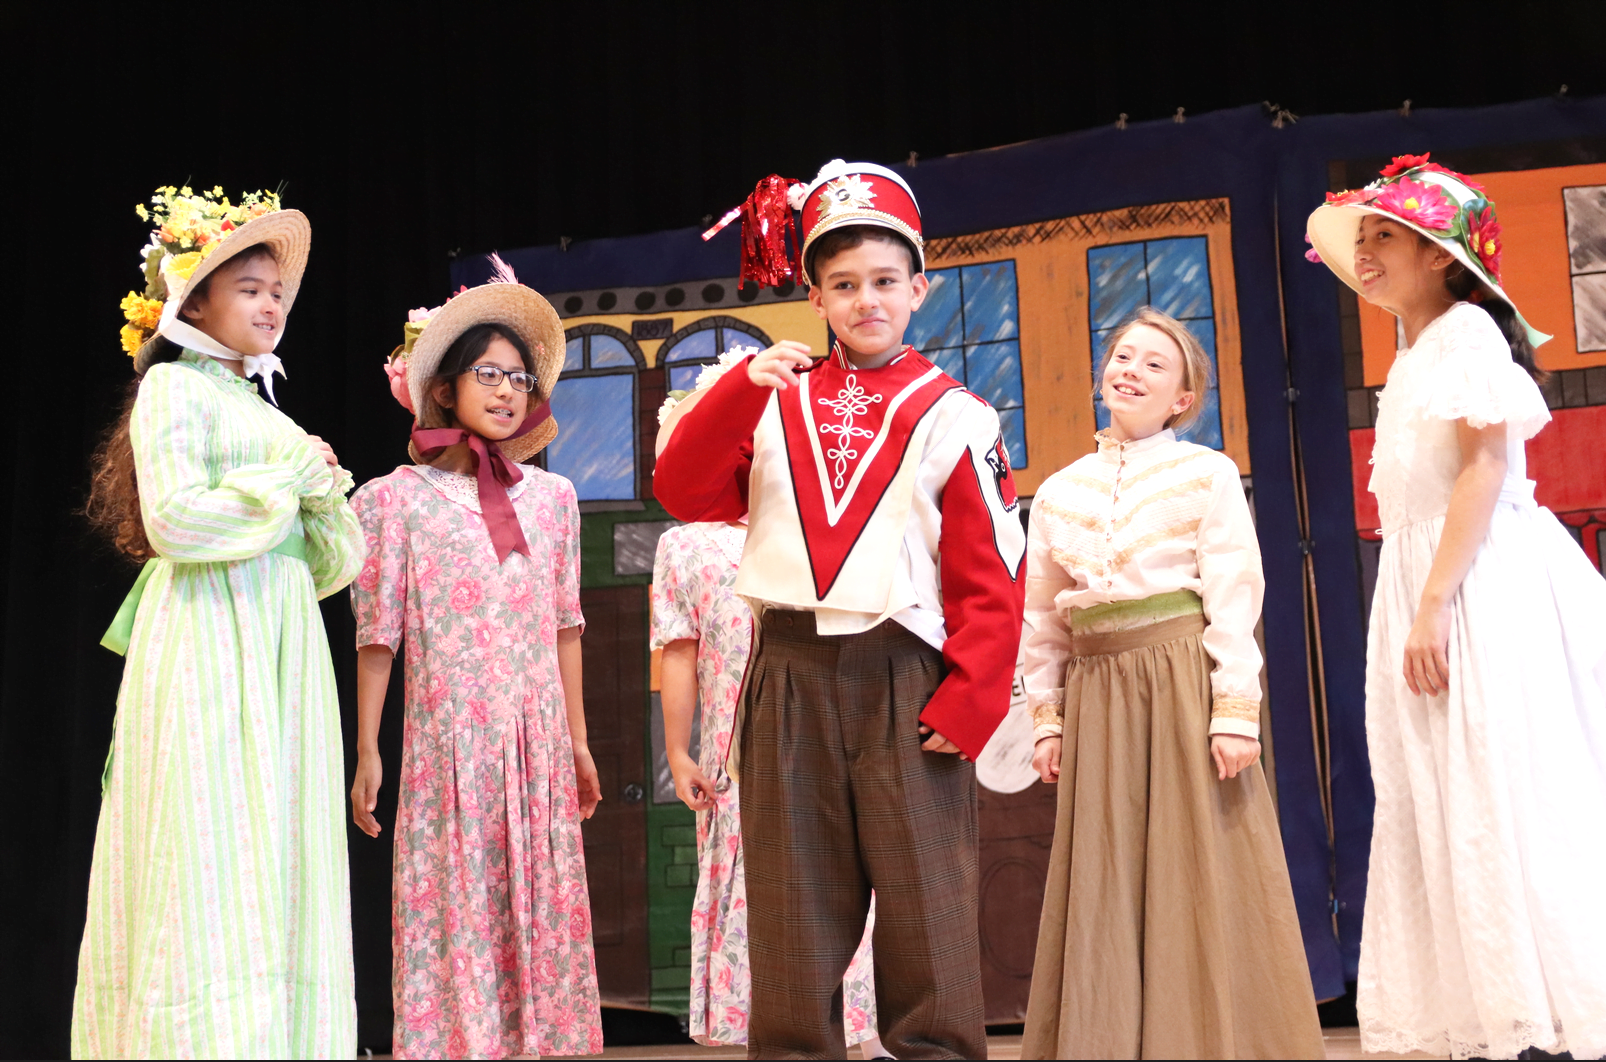 New Lebanon School cast and crew rehearsed The Music Man which they will peform on Nov 26, 2019. Photo: Leslie Yager